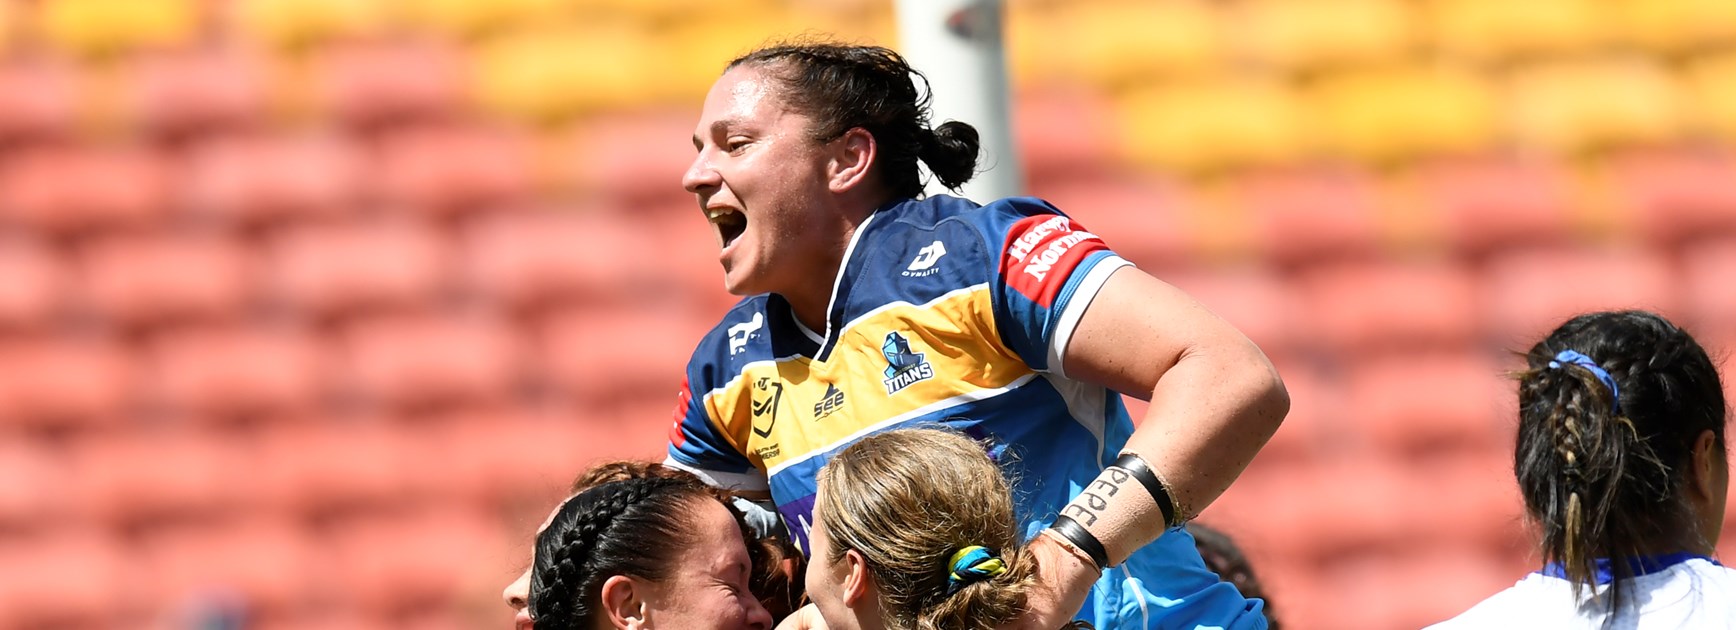 NRLW contracting window set to open in watershed moment